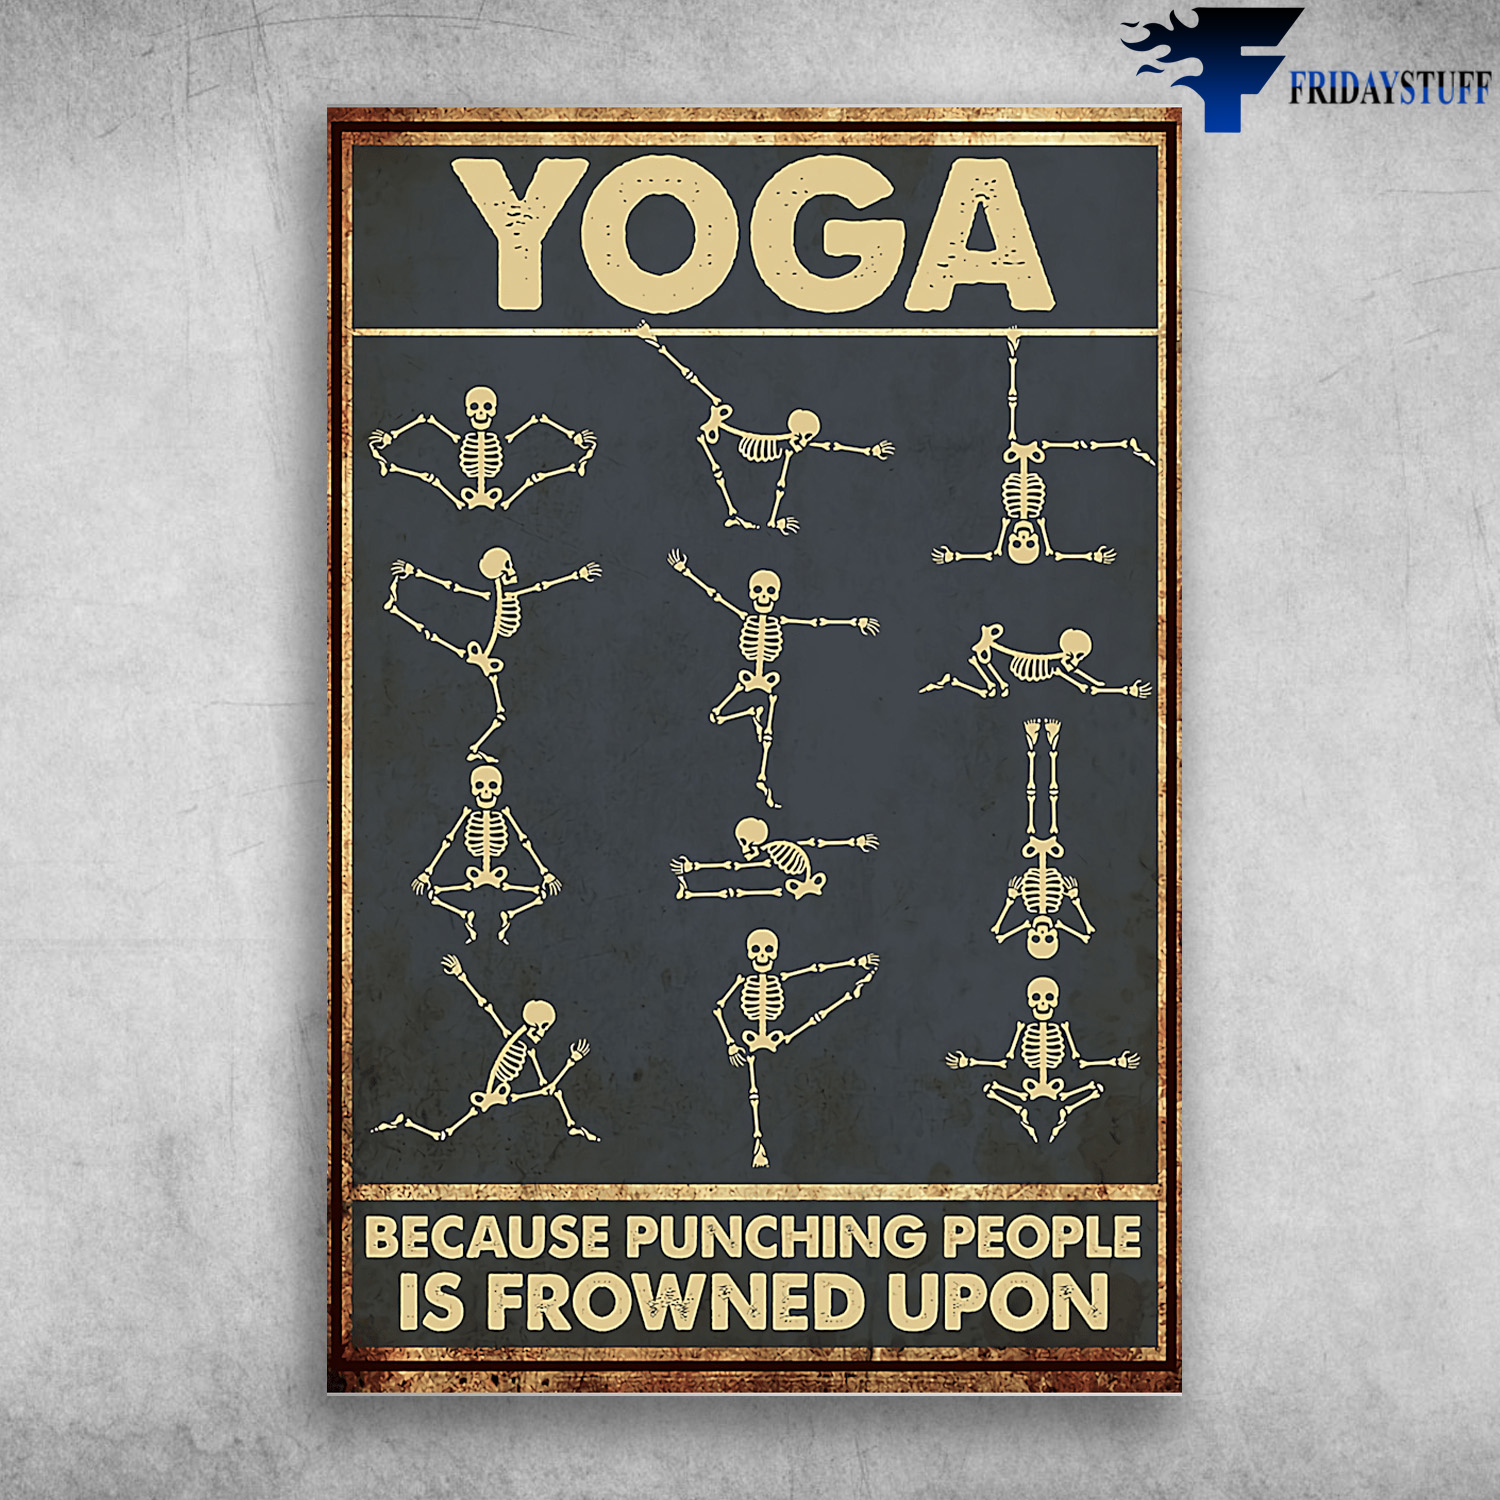 Yoga Skeleton - Yoga Because Punching People Is Frowned Upon